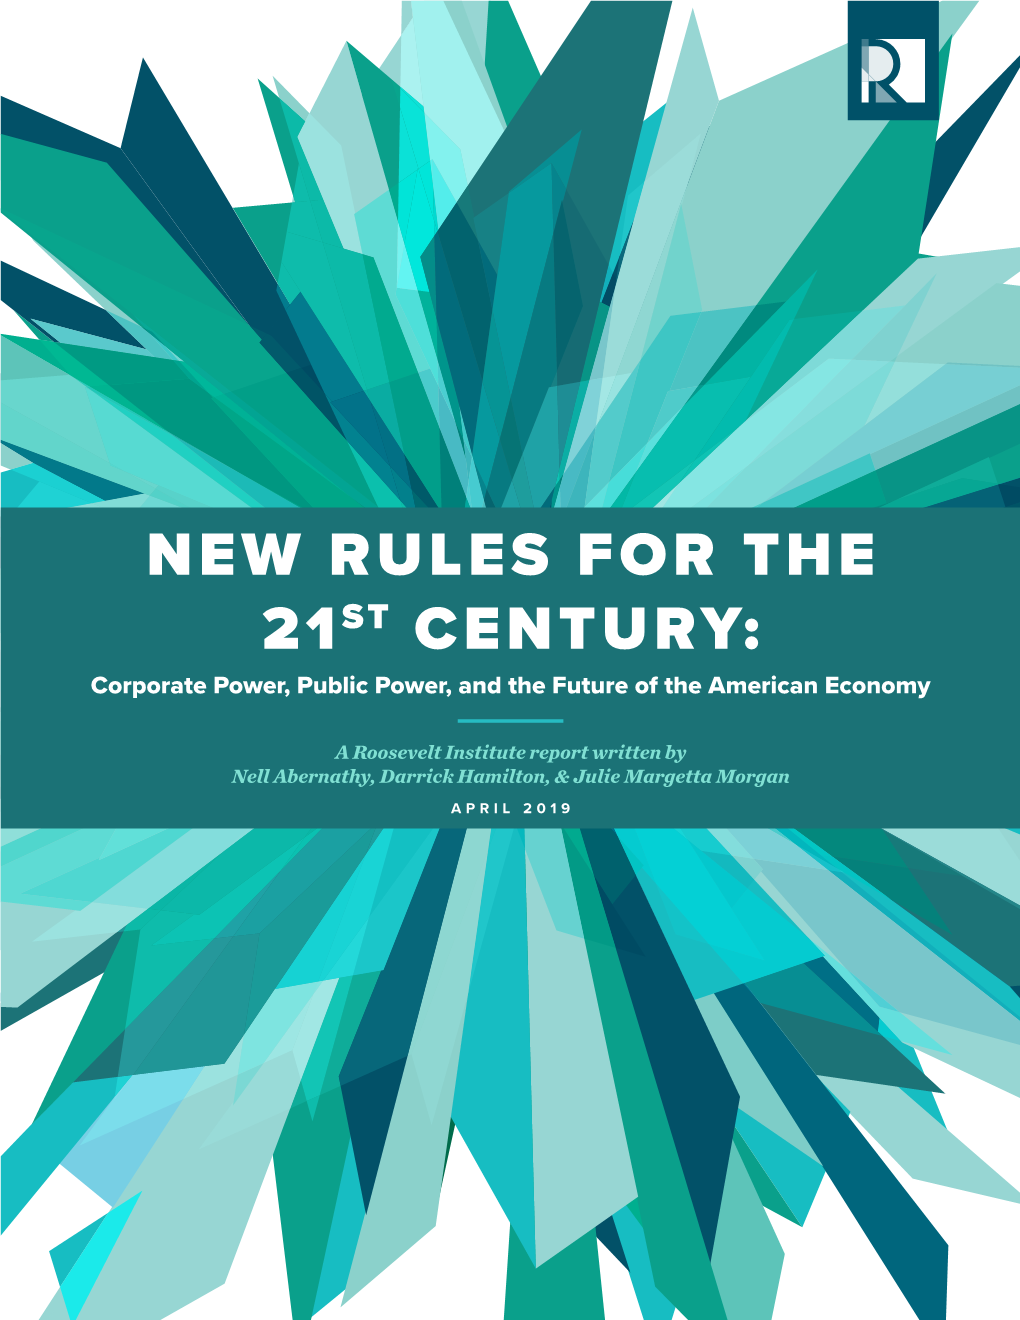 NEW RULES for the 21ST CENTURY: Corporate Power, Public Power, and the Future of the American Economy